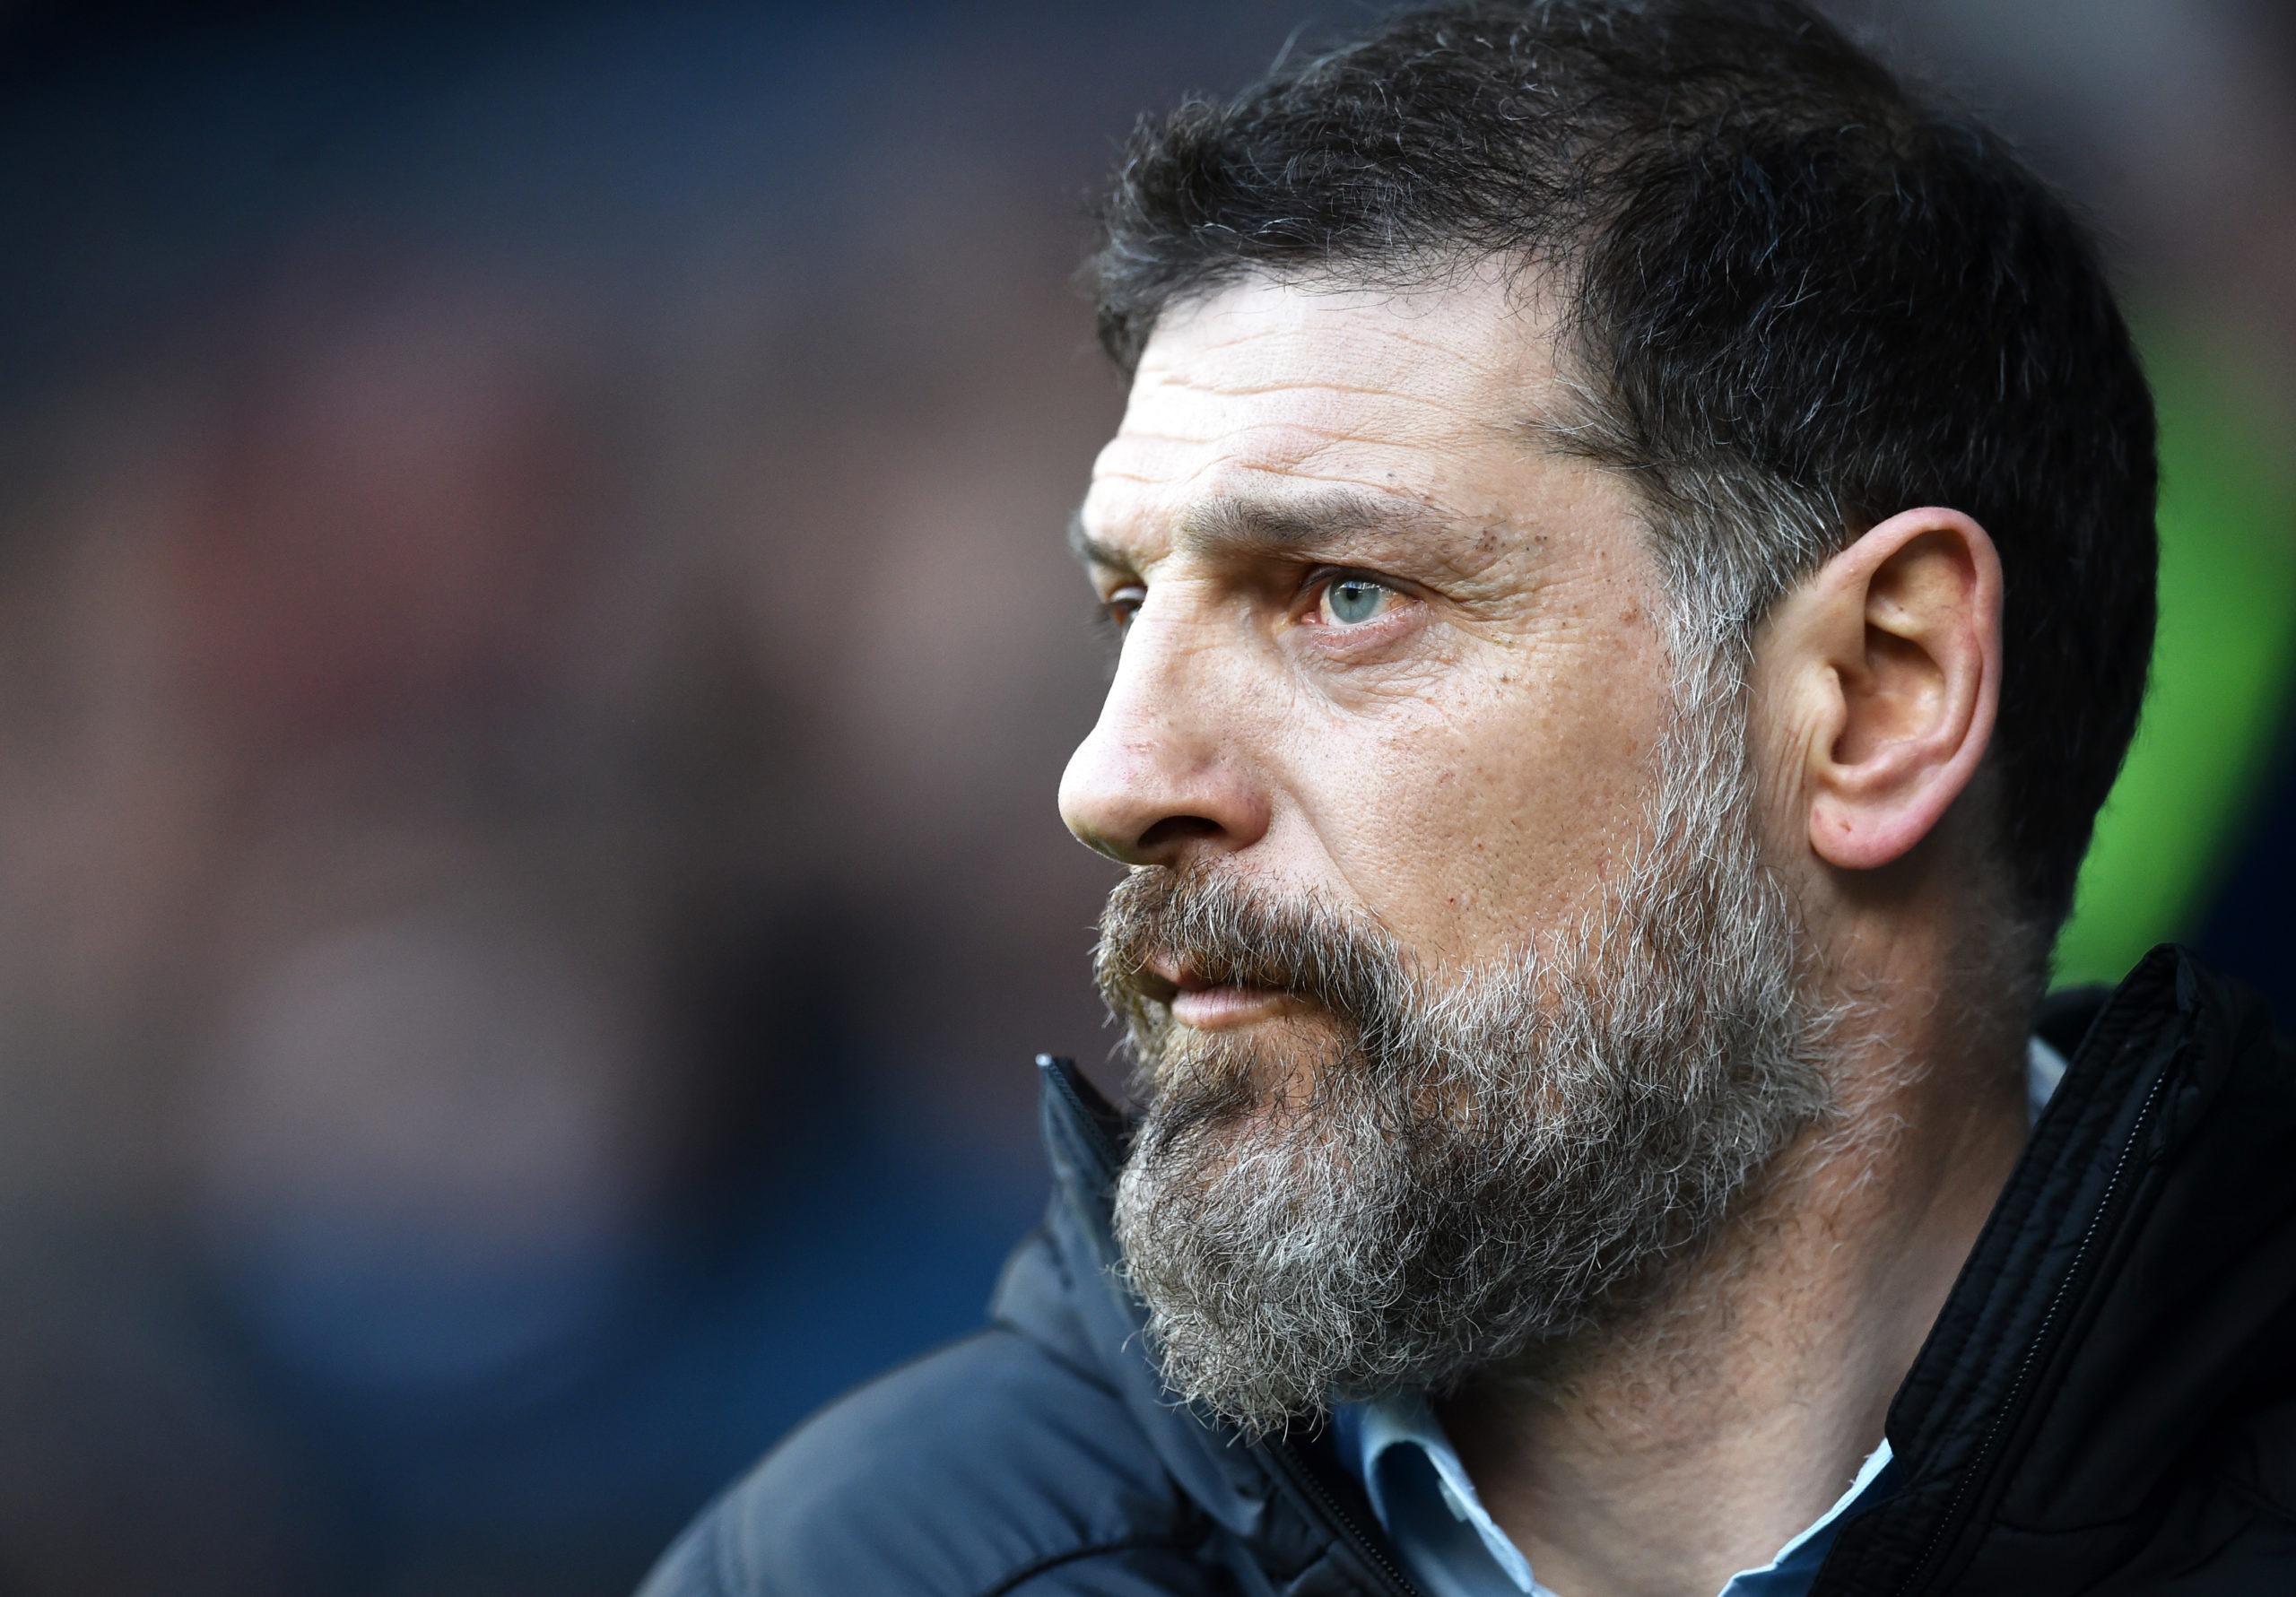 Celtic manager latest: would outward-bound Slaven Bilic represent an upgrade?